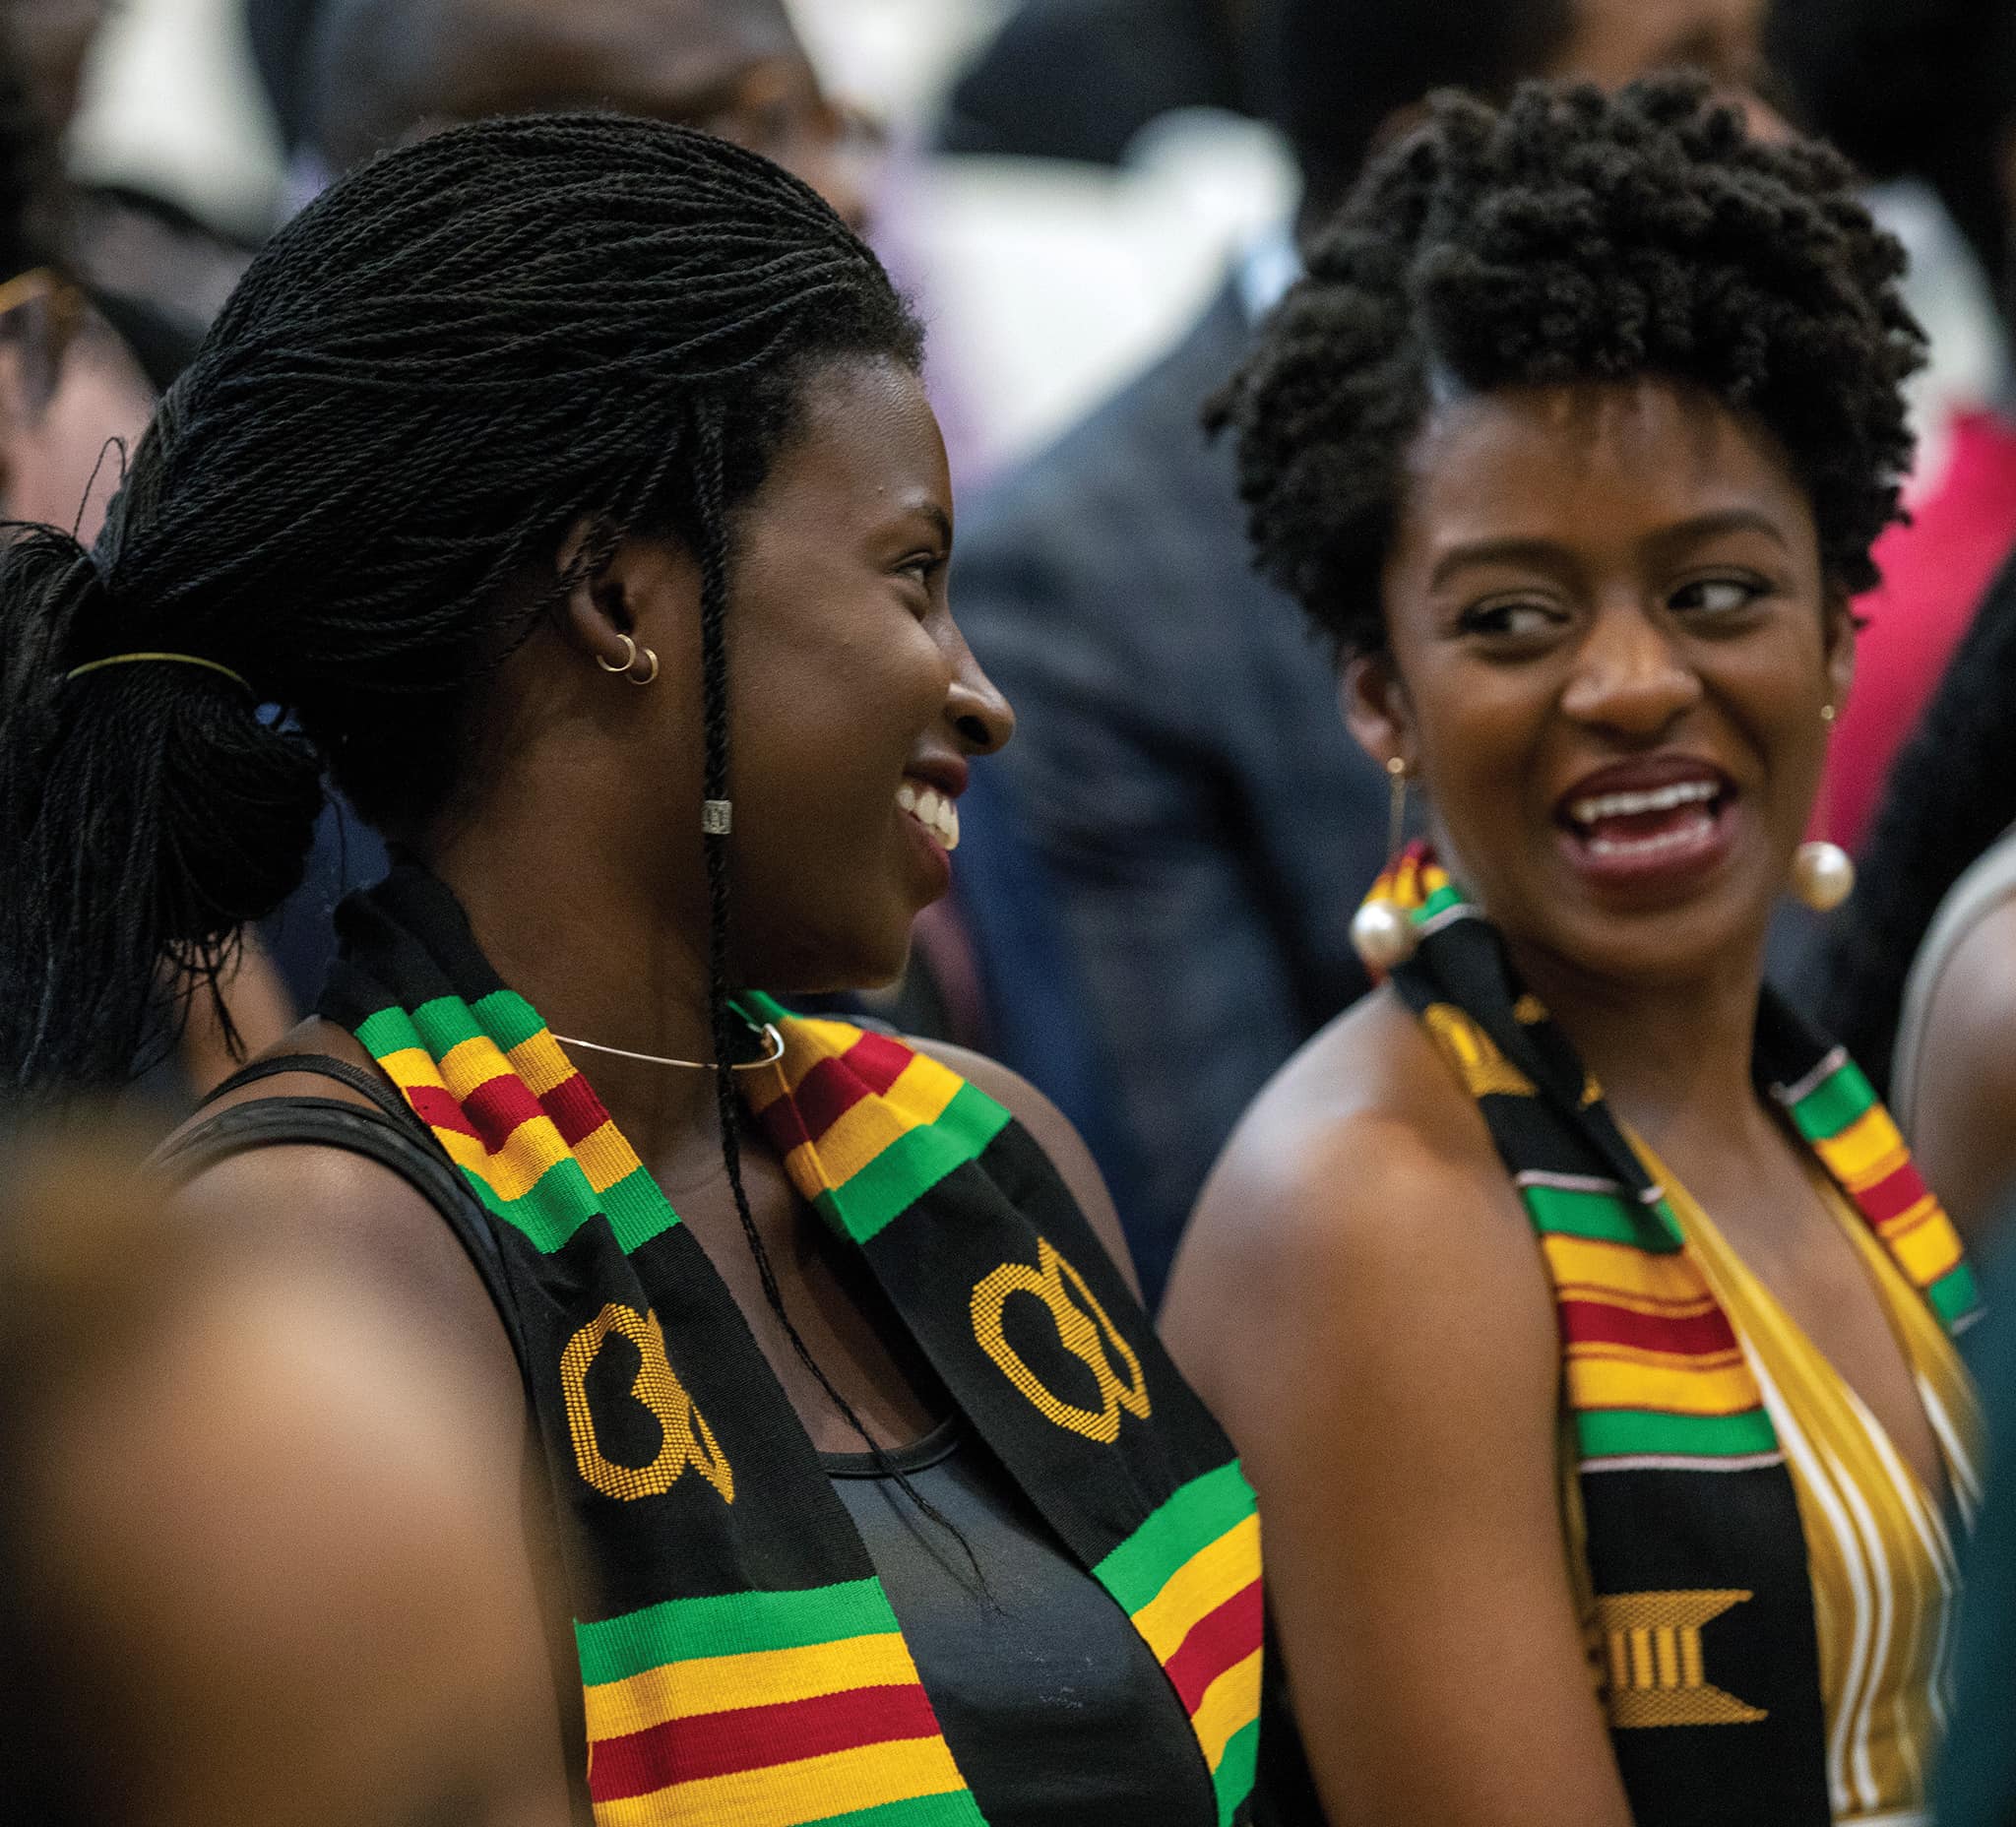 Two Black women laugh happily together. Both are wearing scarves in the pan-African colours of green, yellow and red.